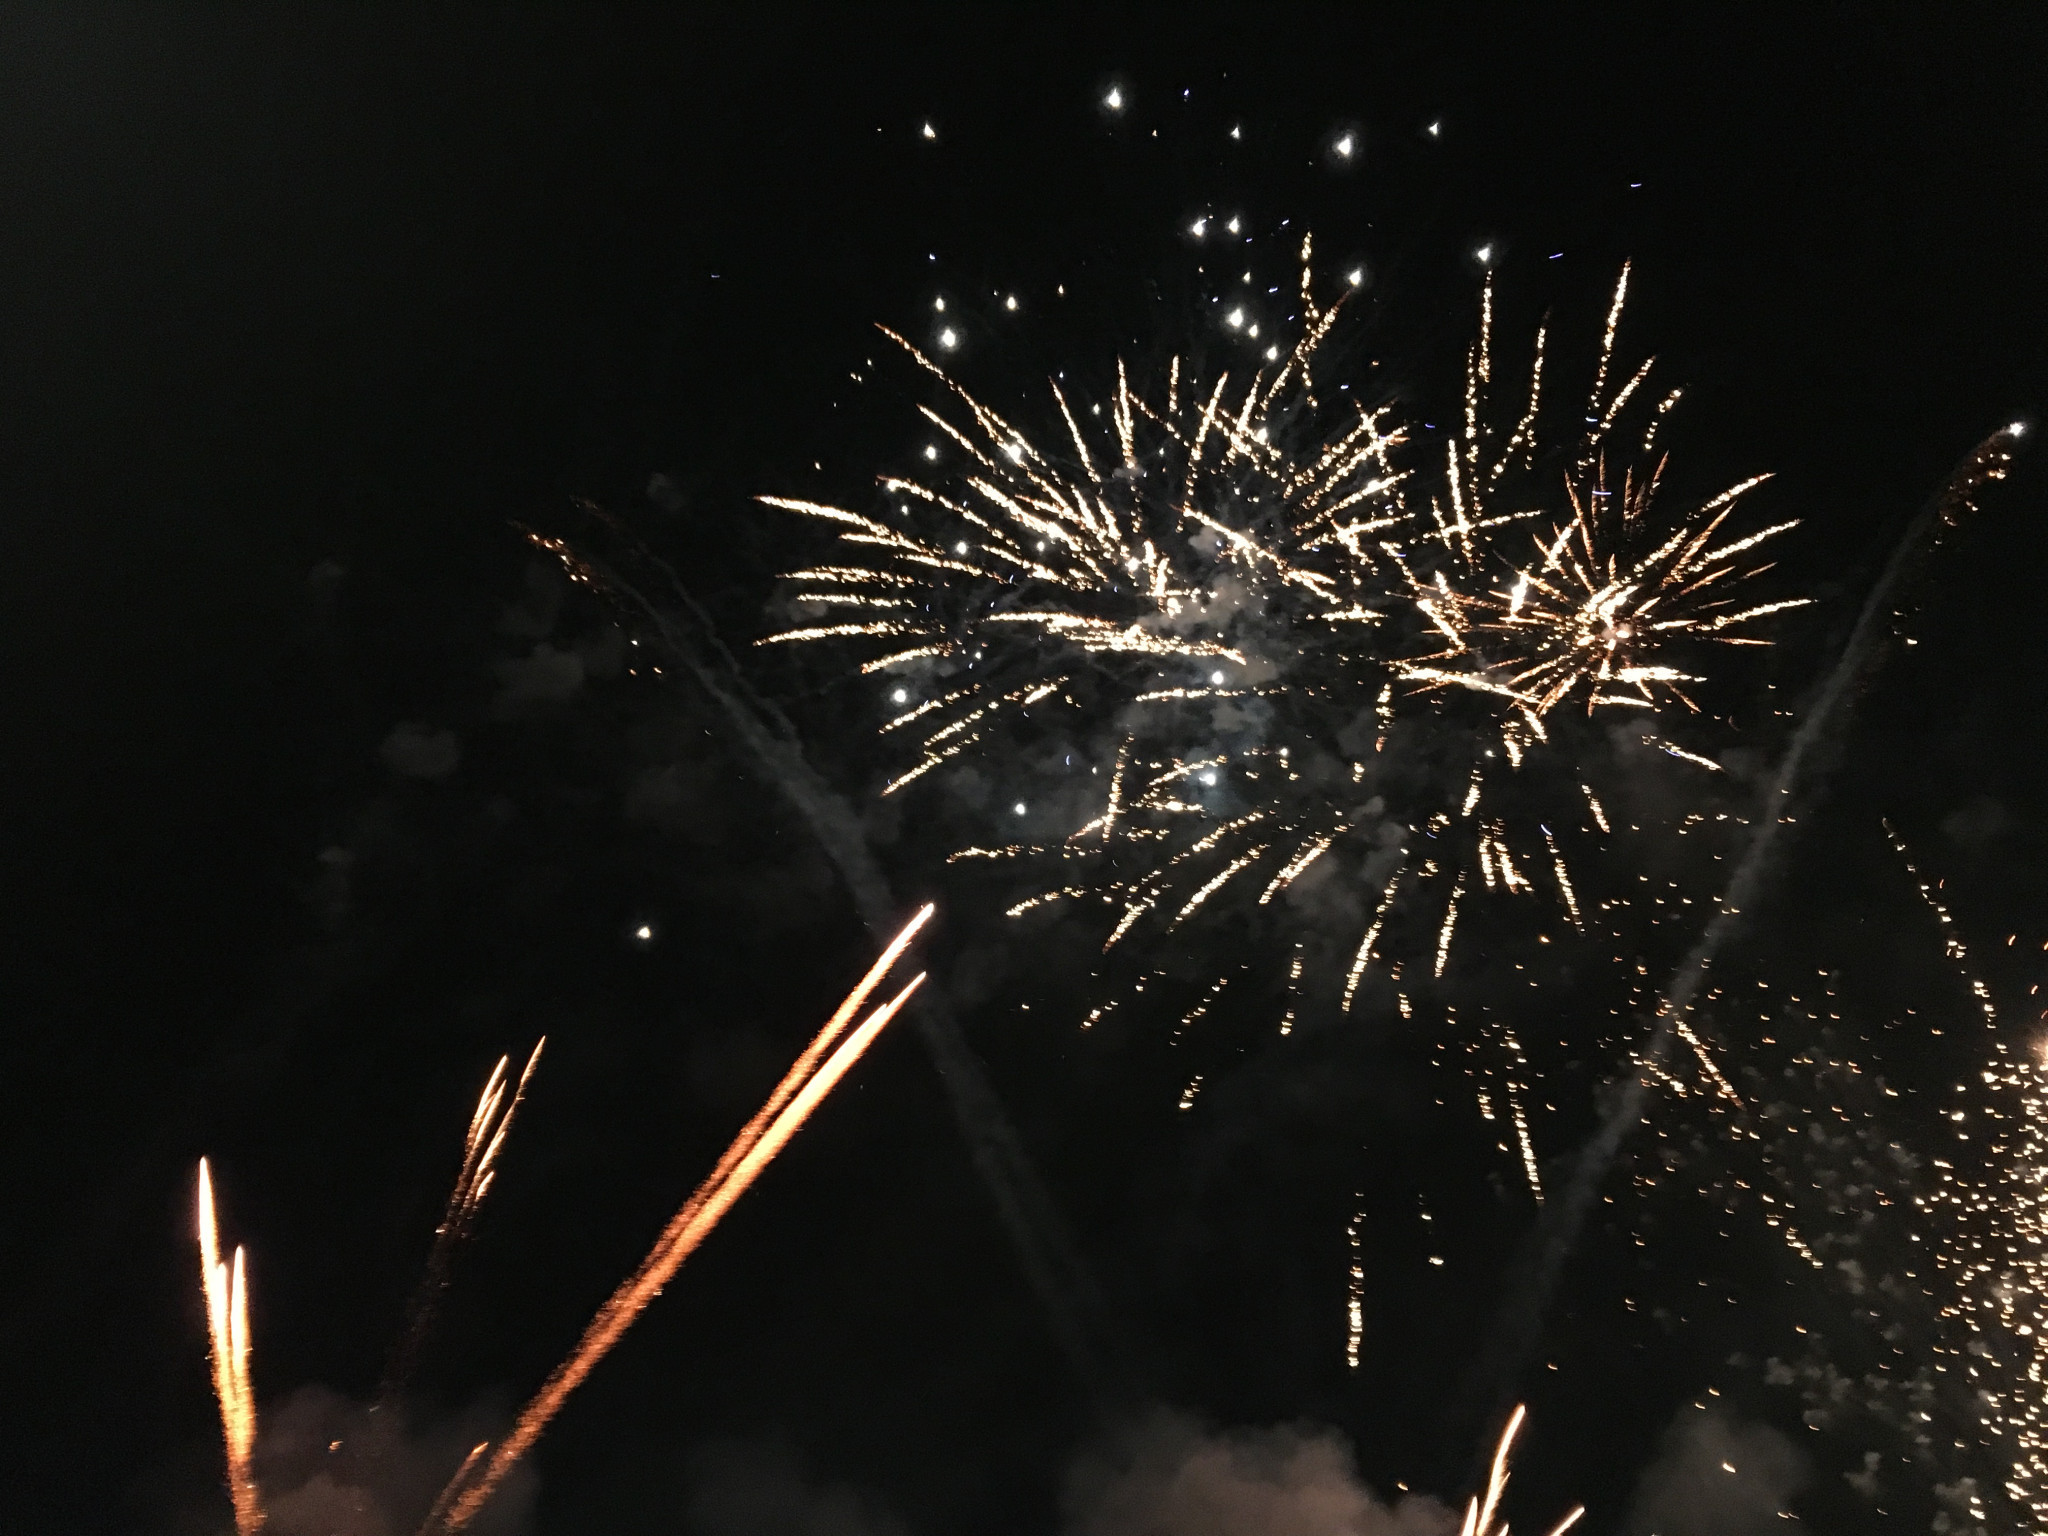 Today's competition ended with a fireworks display outside the arena to celebrate the sport's 80th anniversary ©ITG